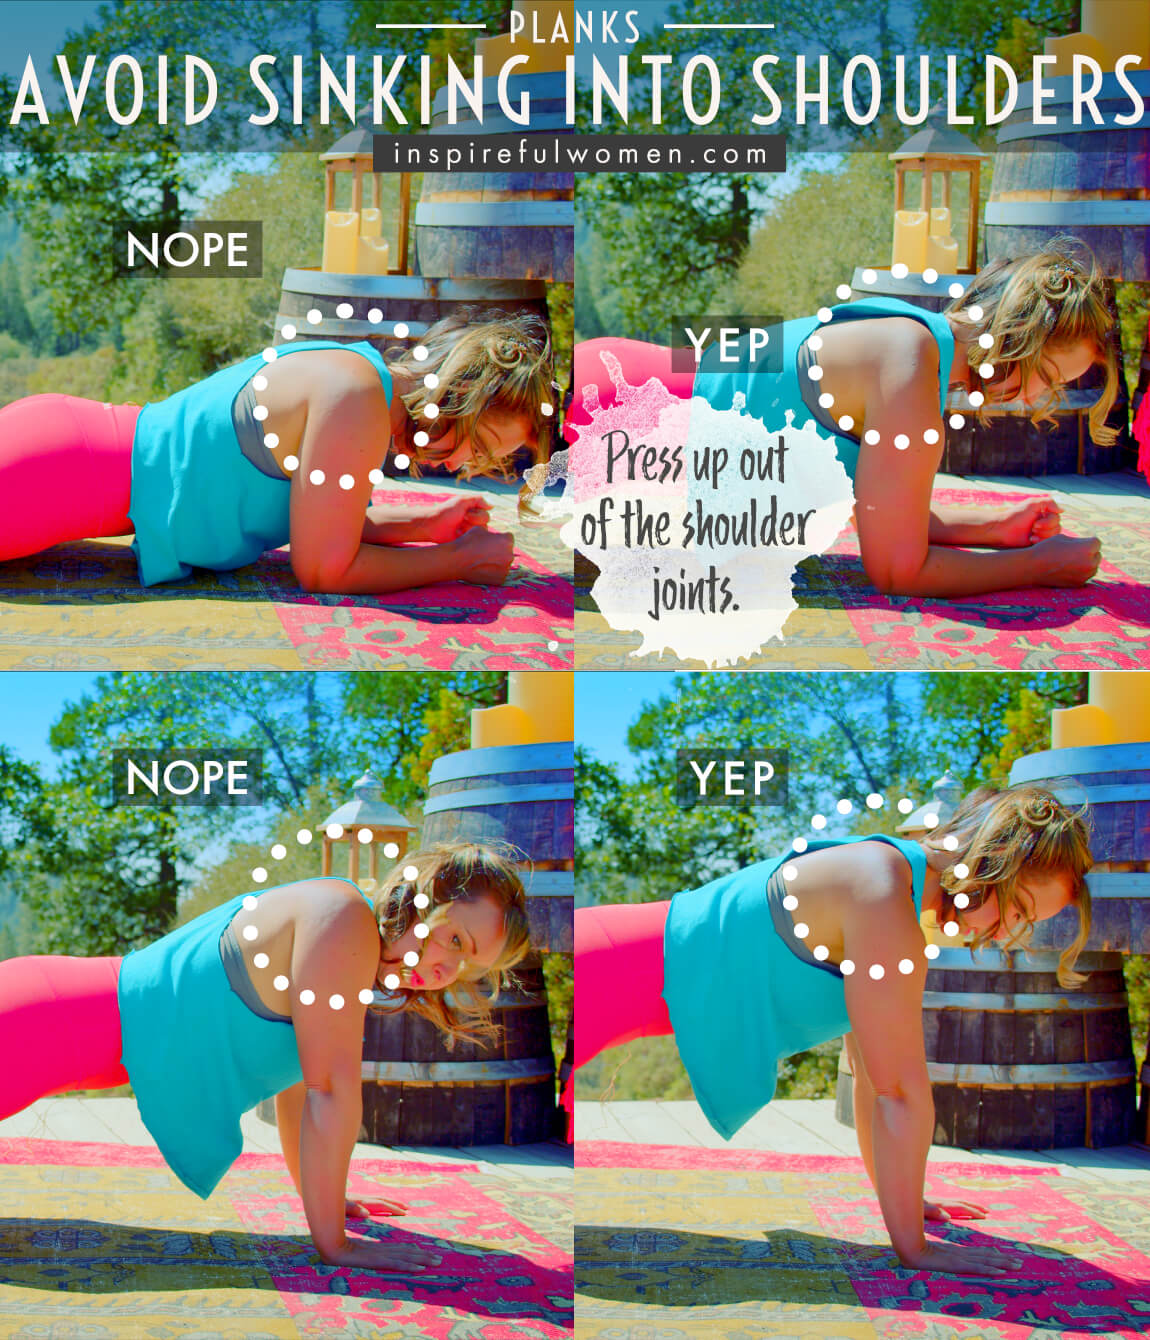 avoid-sinking-into-shoulders-plank-core-exercise-common-mistakes